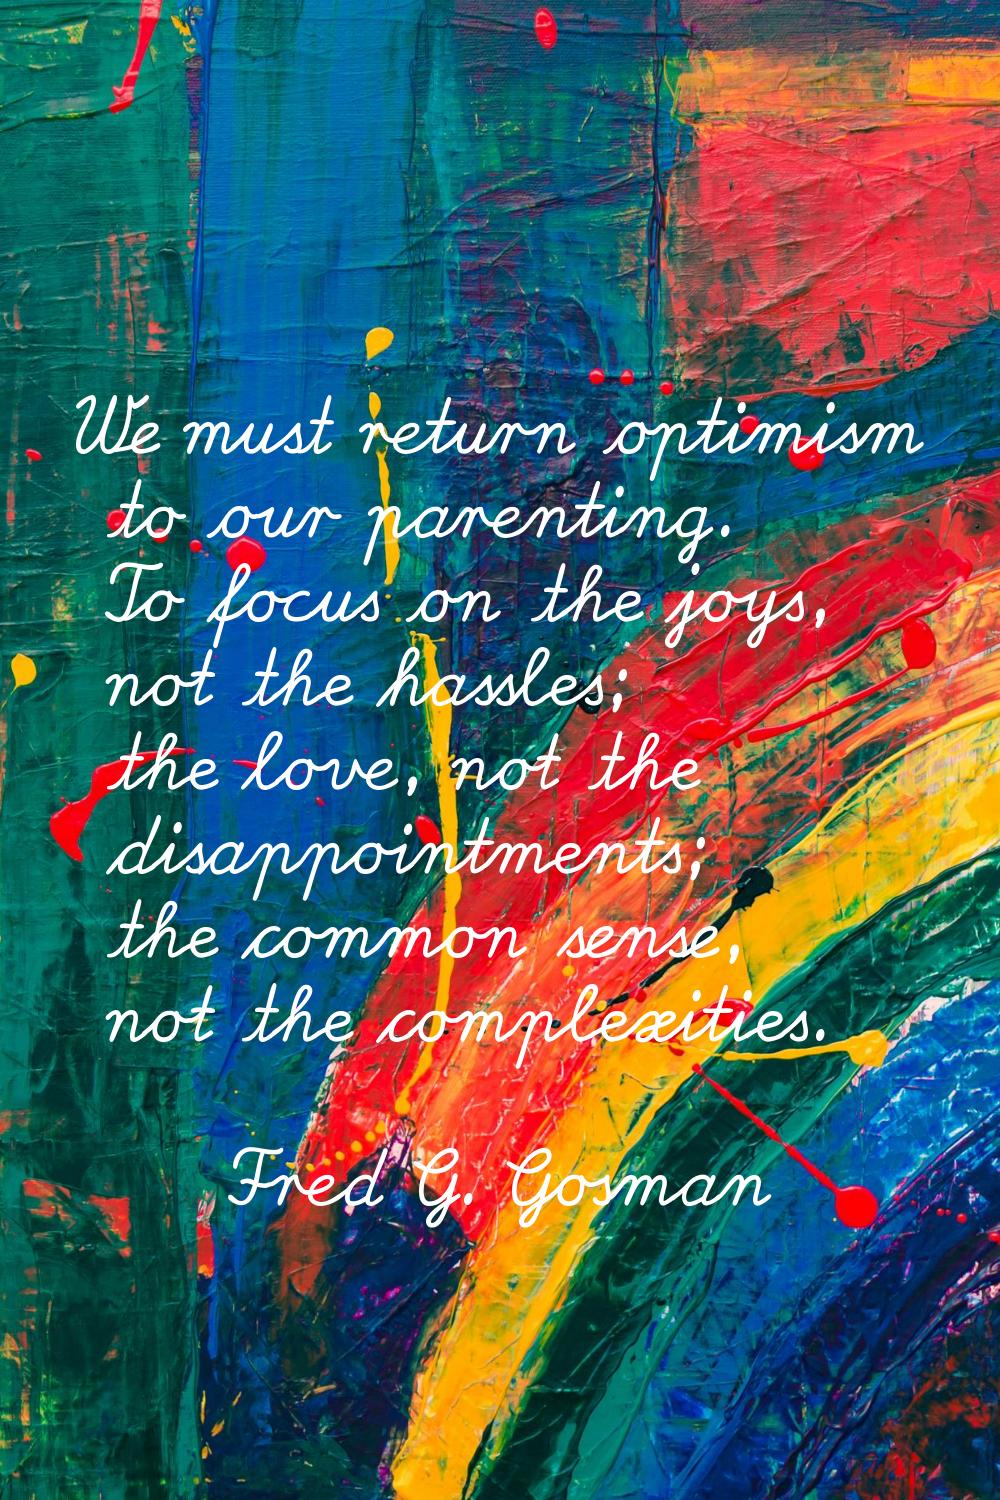 We must return optimism to our parenting. To focus on the joys, not the hassles; the love, not the 